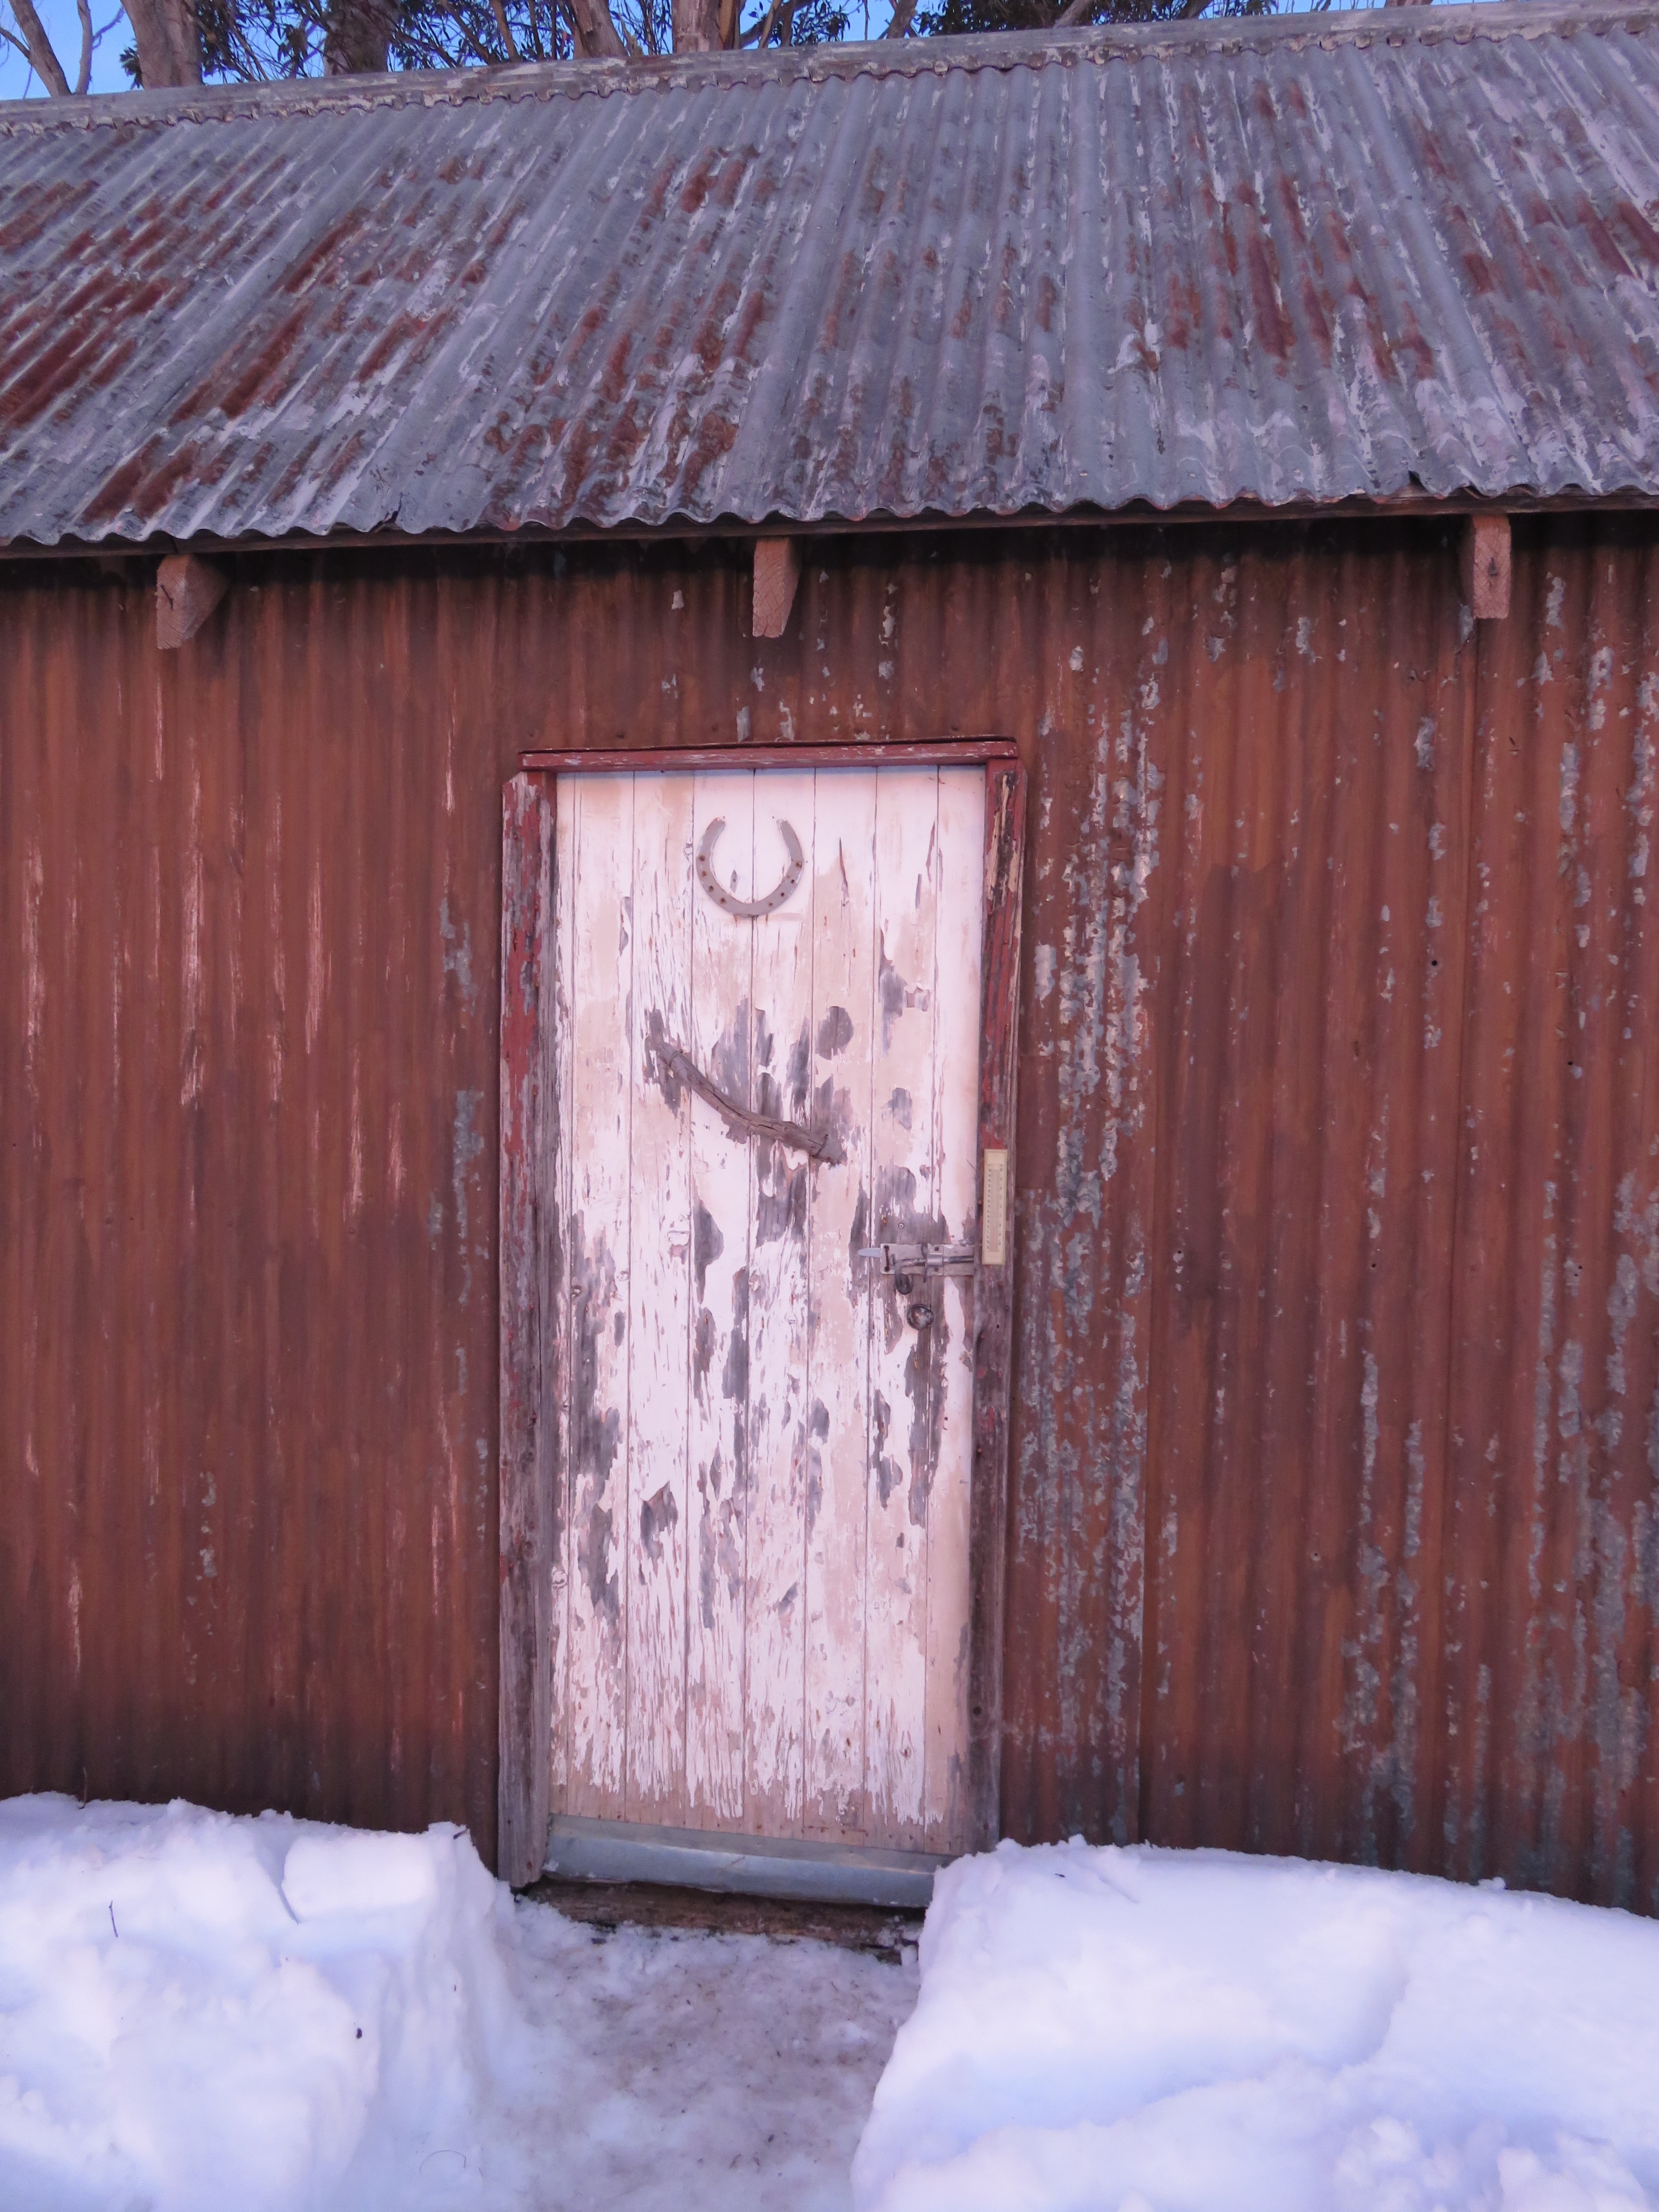 Knock, knock. Great, there's no-one there. Grey Mare Hut